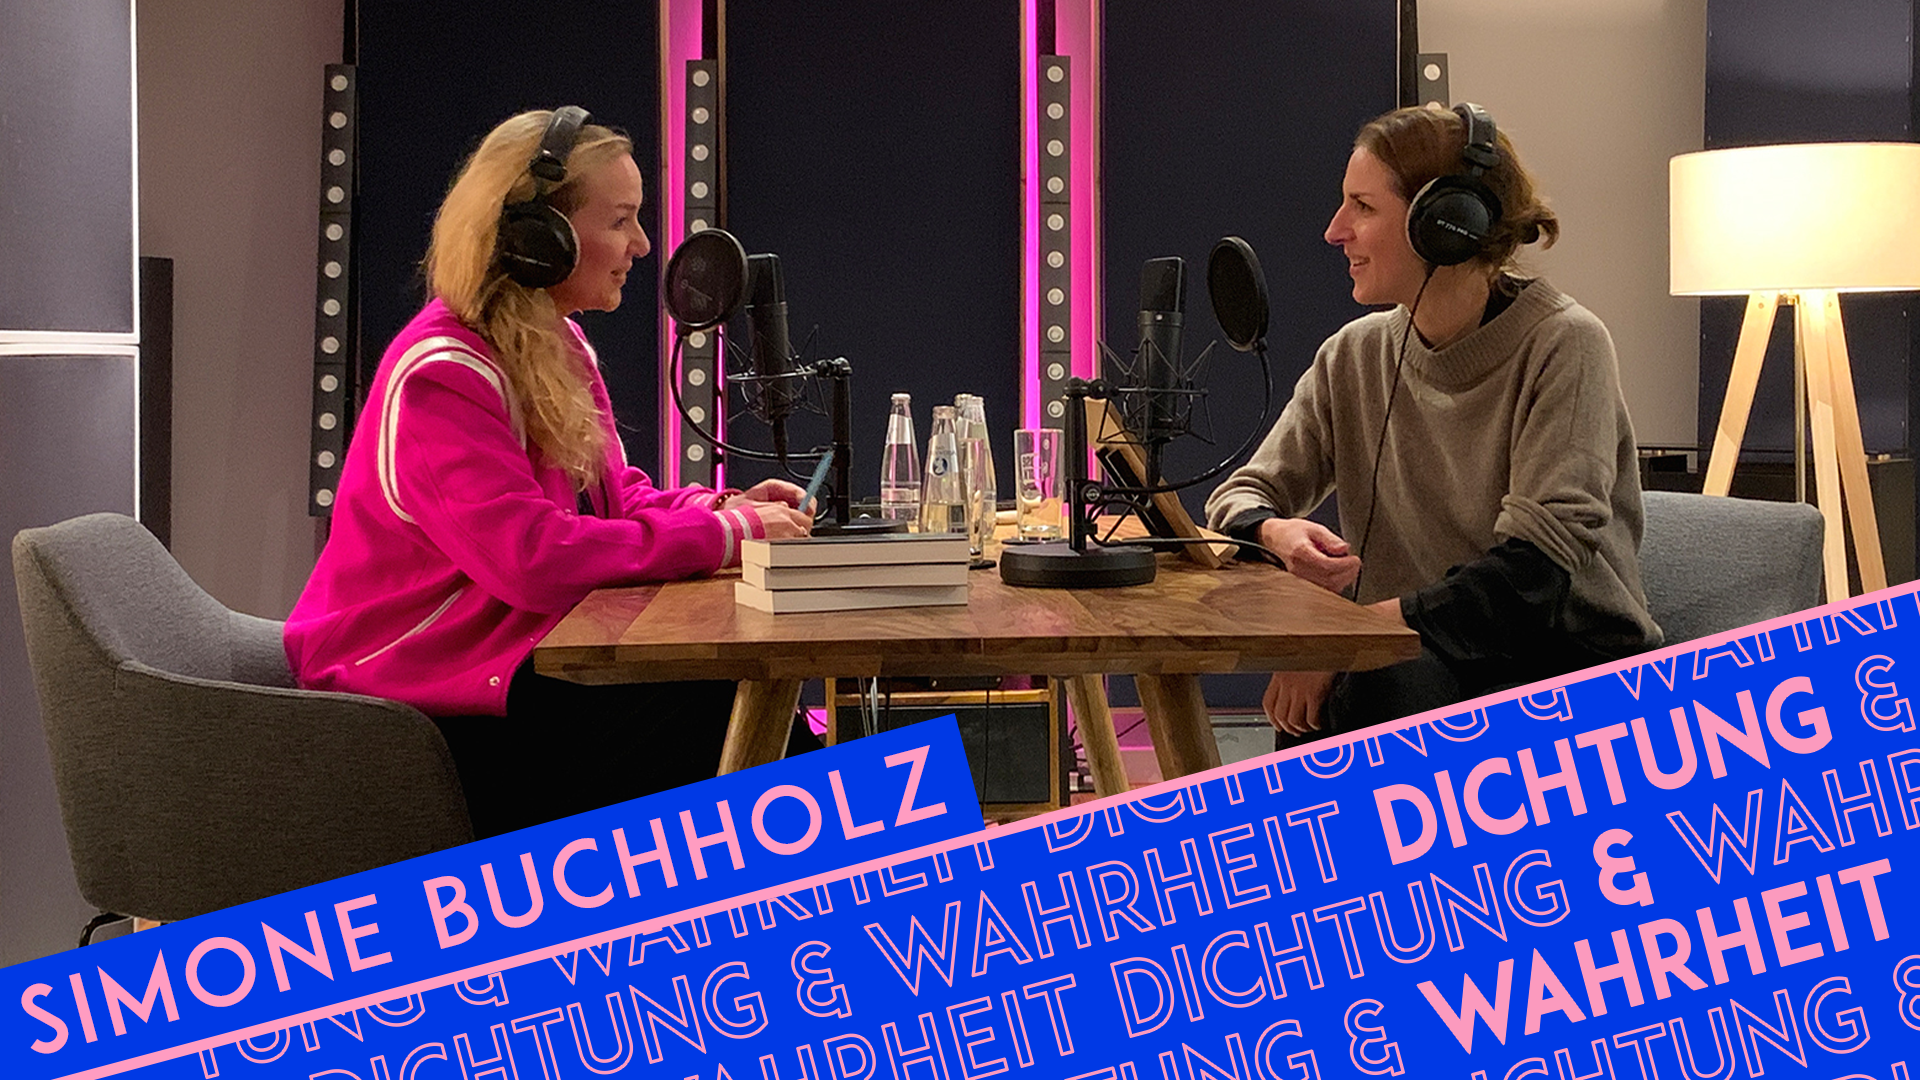 Beitrag zu Podcast: Simone Buchholz, what helps against the pains of being human? | Dichtung & Wahrheit #3